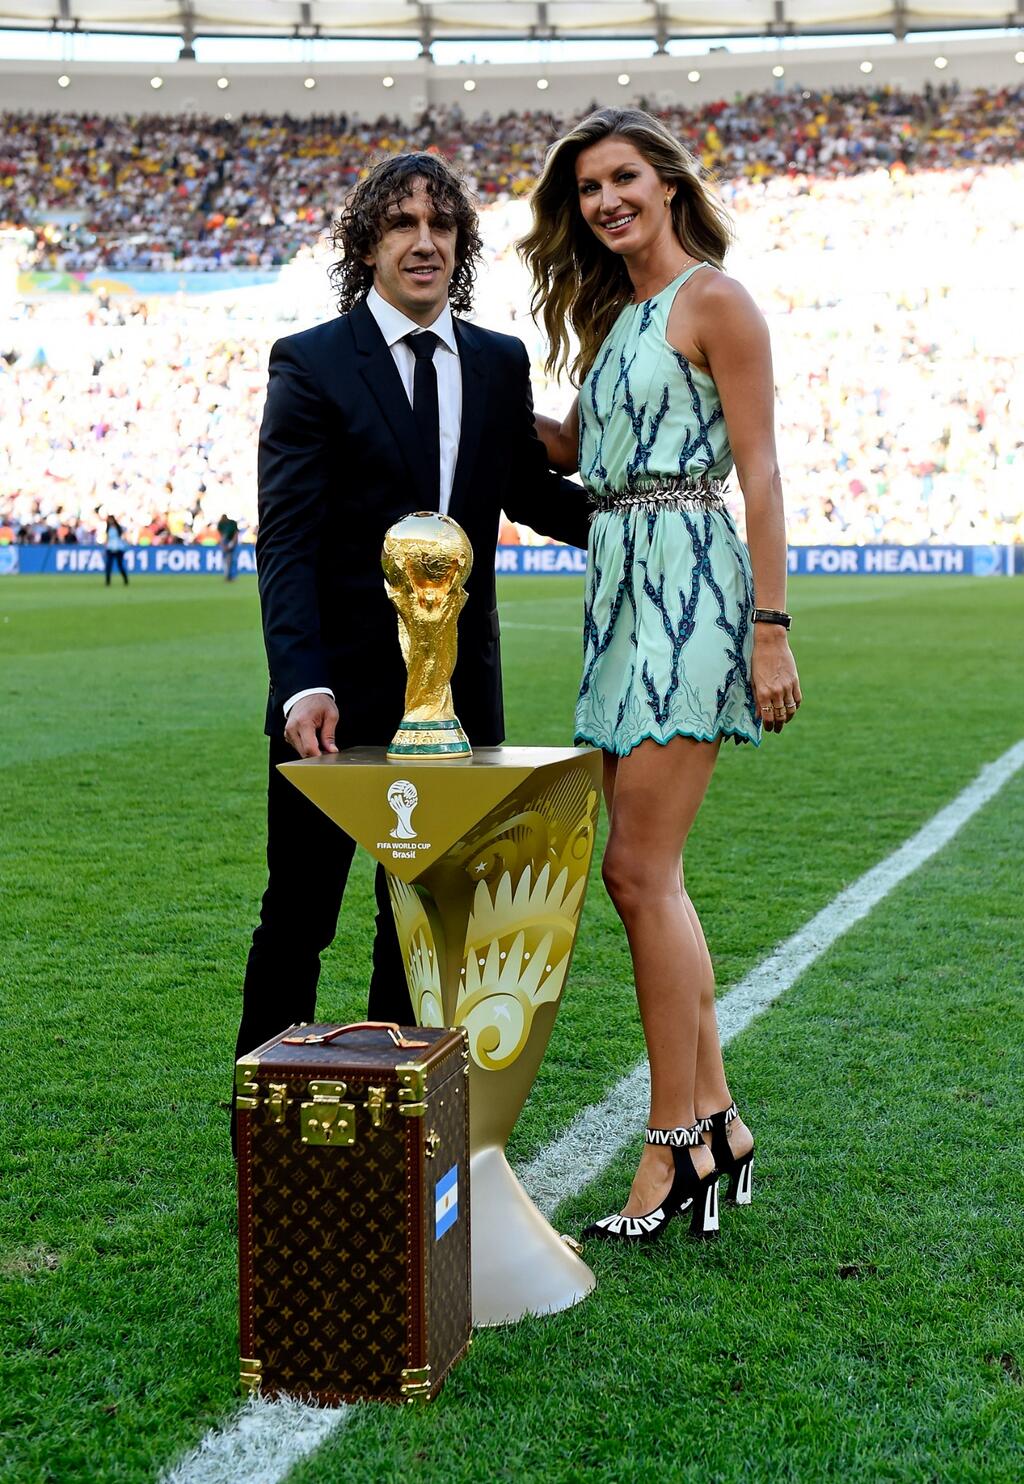 Louis Vuitton on X: .@GiseleOfficial awaits to present the FIFA